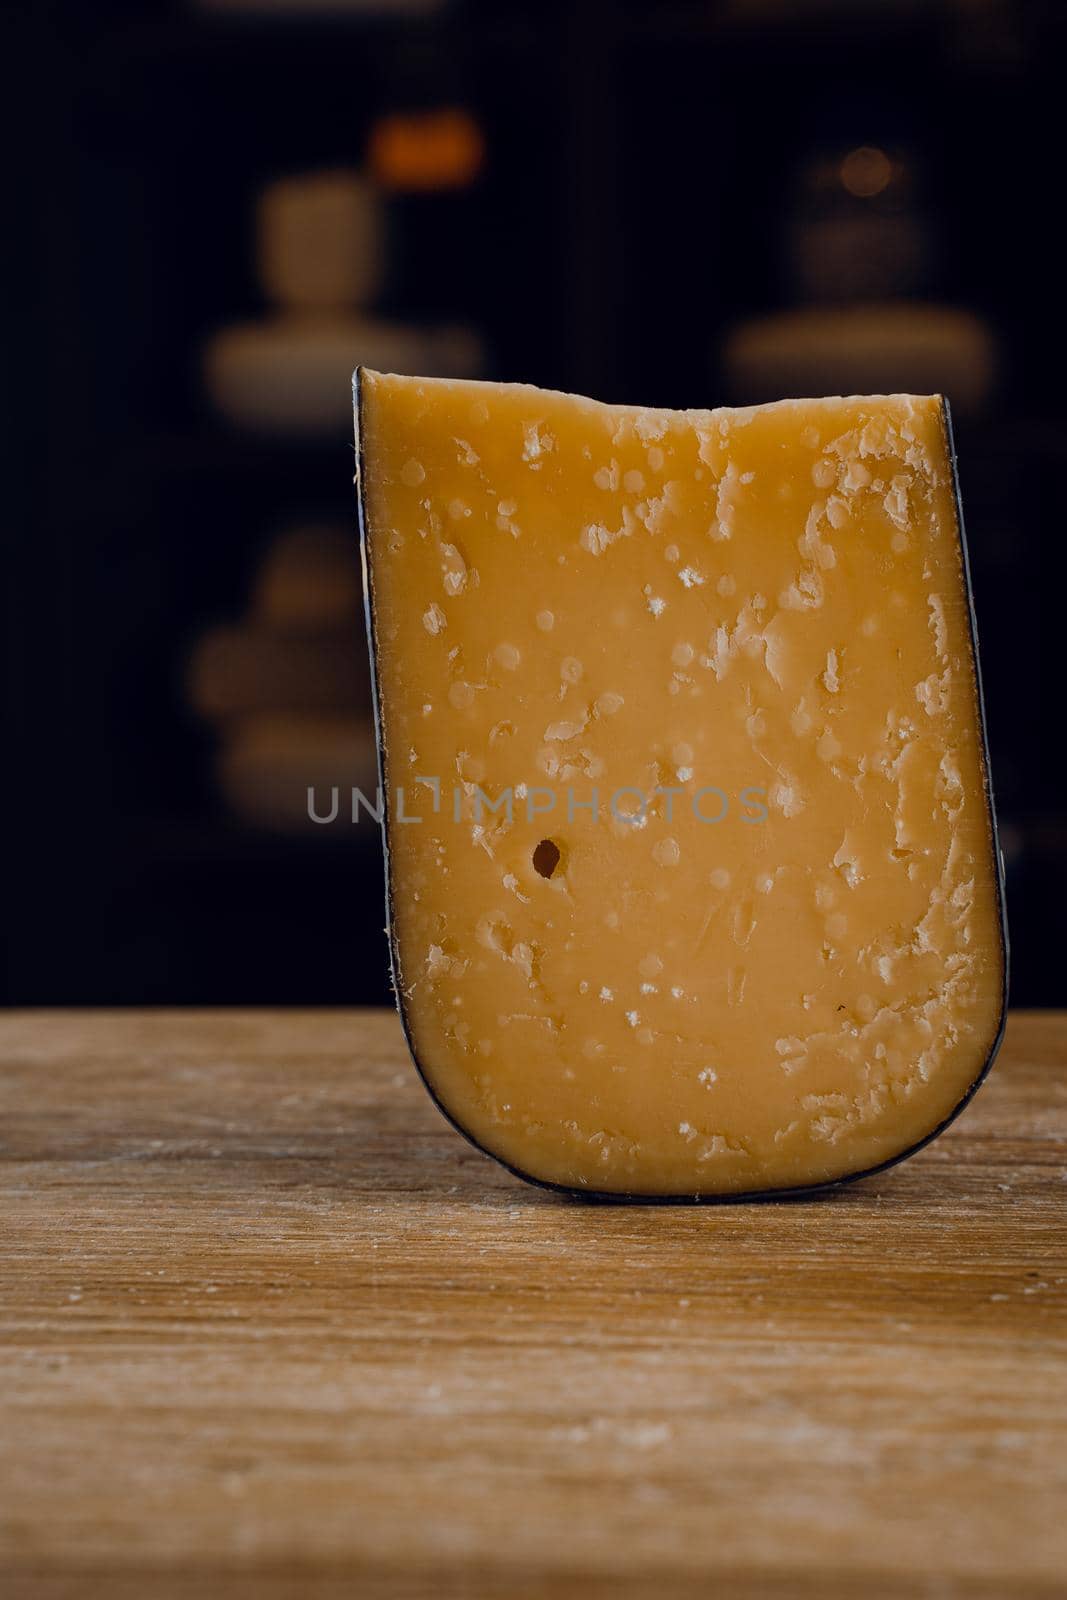 Parmesan hard aged cheese on wooden background. Snack tasty piece of cheese for appetizer. by Rabizo